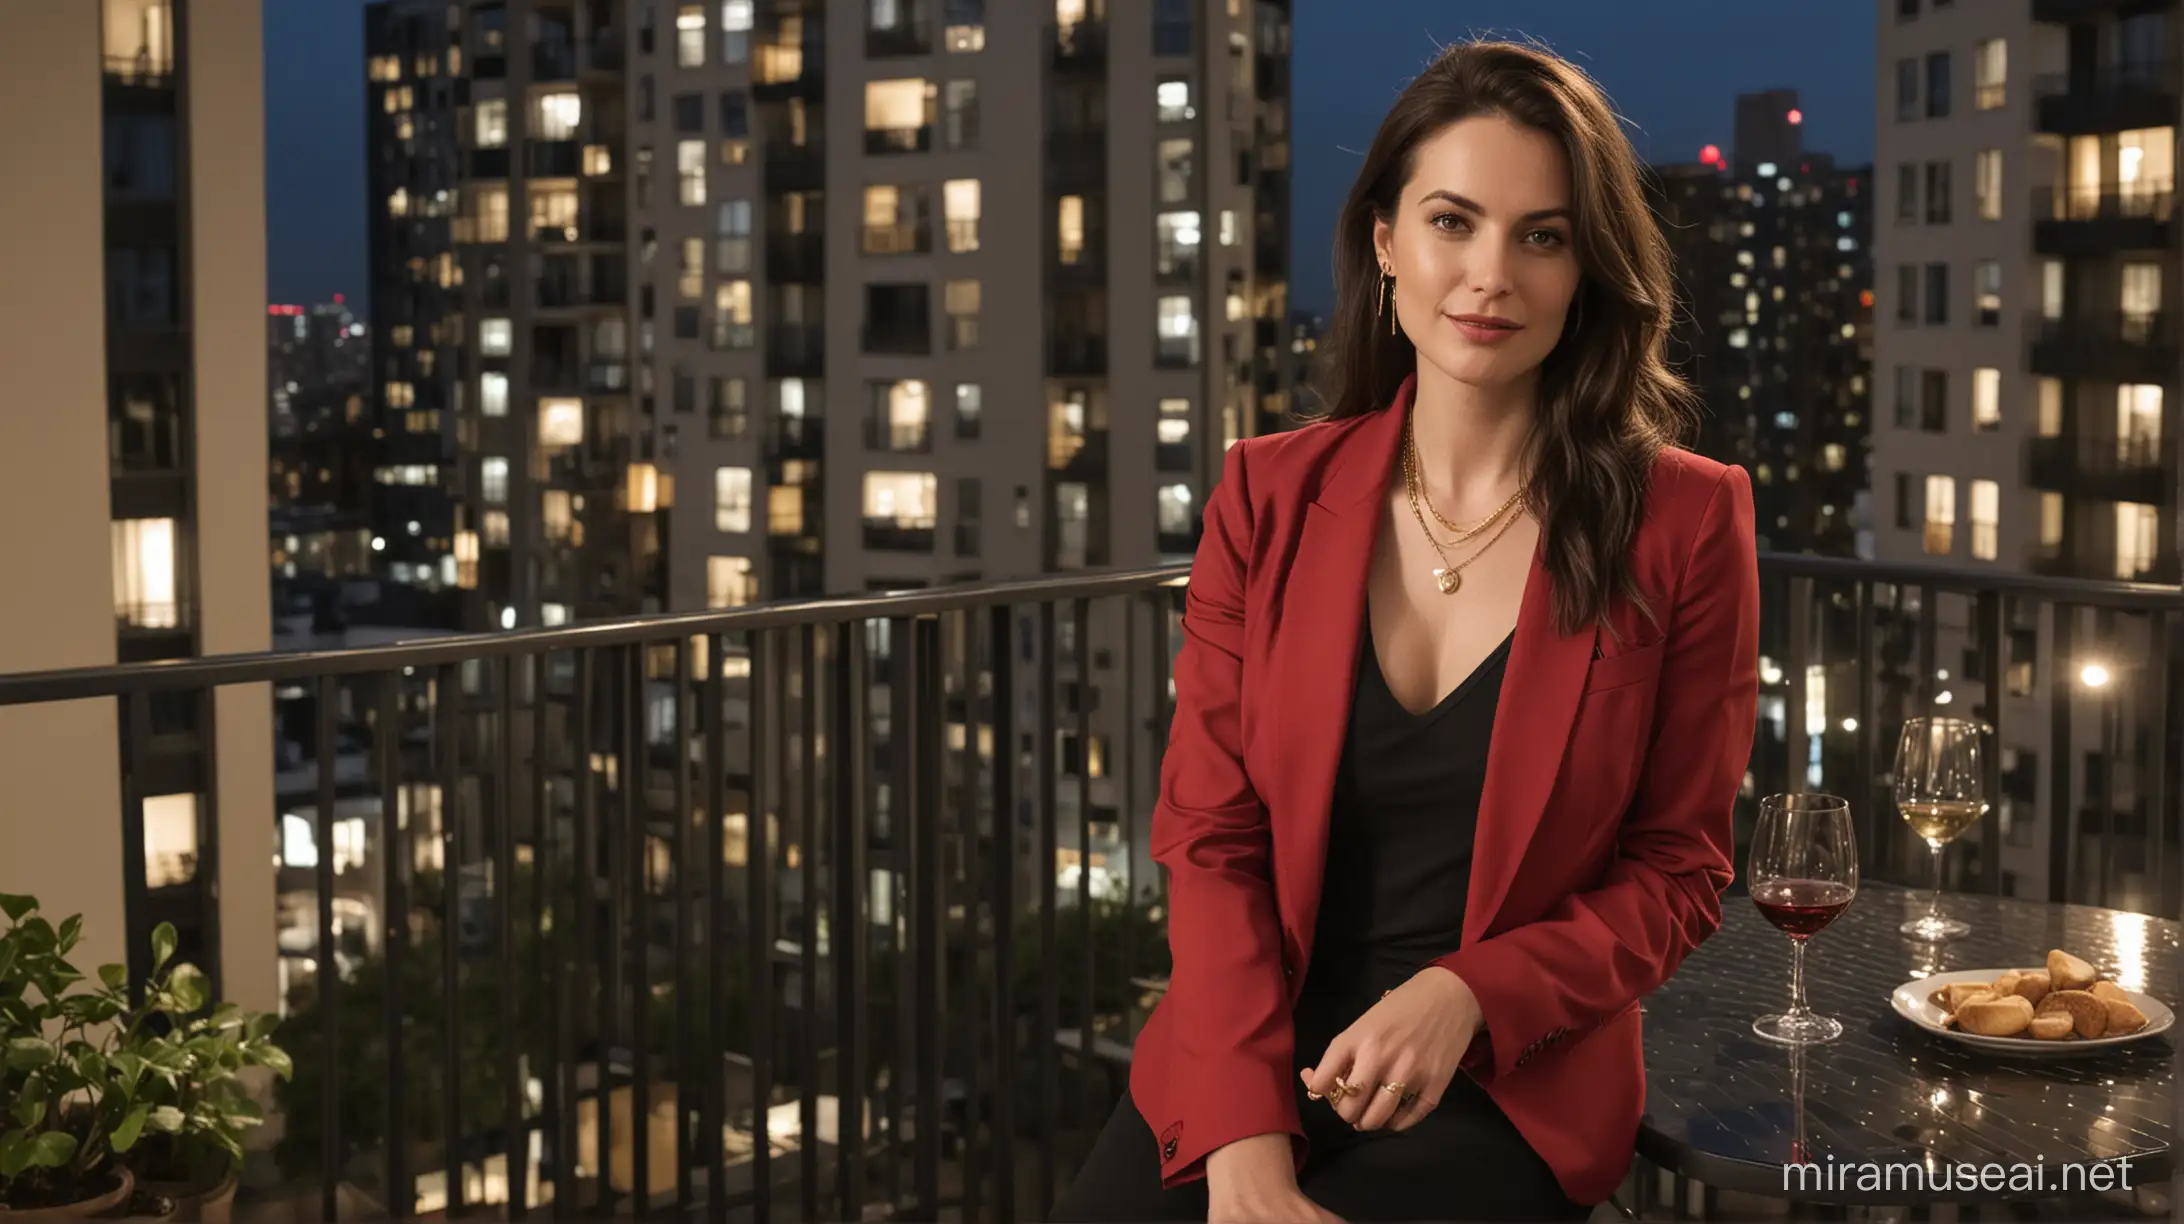 30 year old white woman sitting on patio table with a glass of wine on a balcony, darkly light modern high rise apartment background in the evening. She has long dark brown hair, pale skin, wearing a red blazer, gold necklace with very low cut black shirt and black pants.